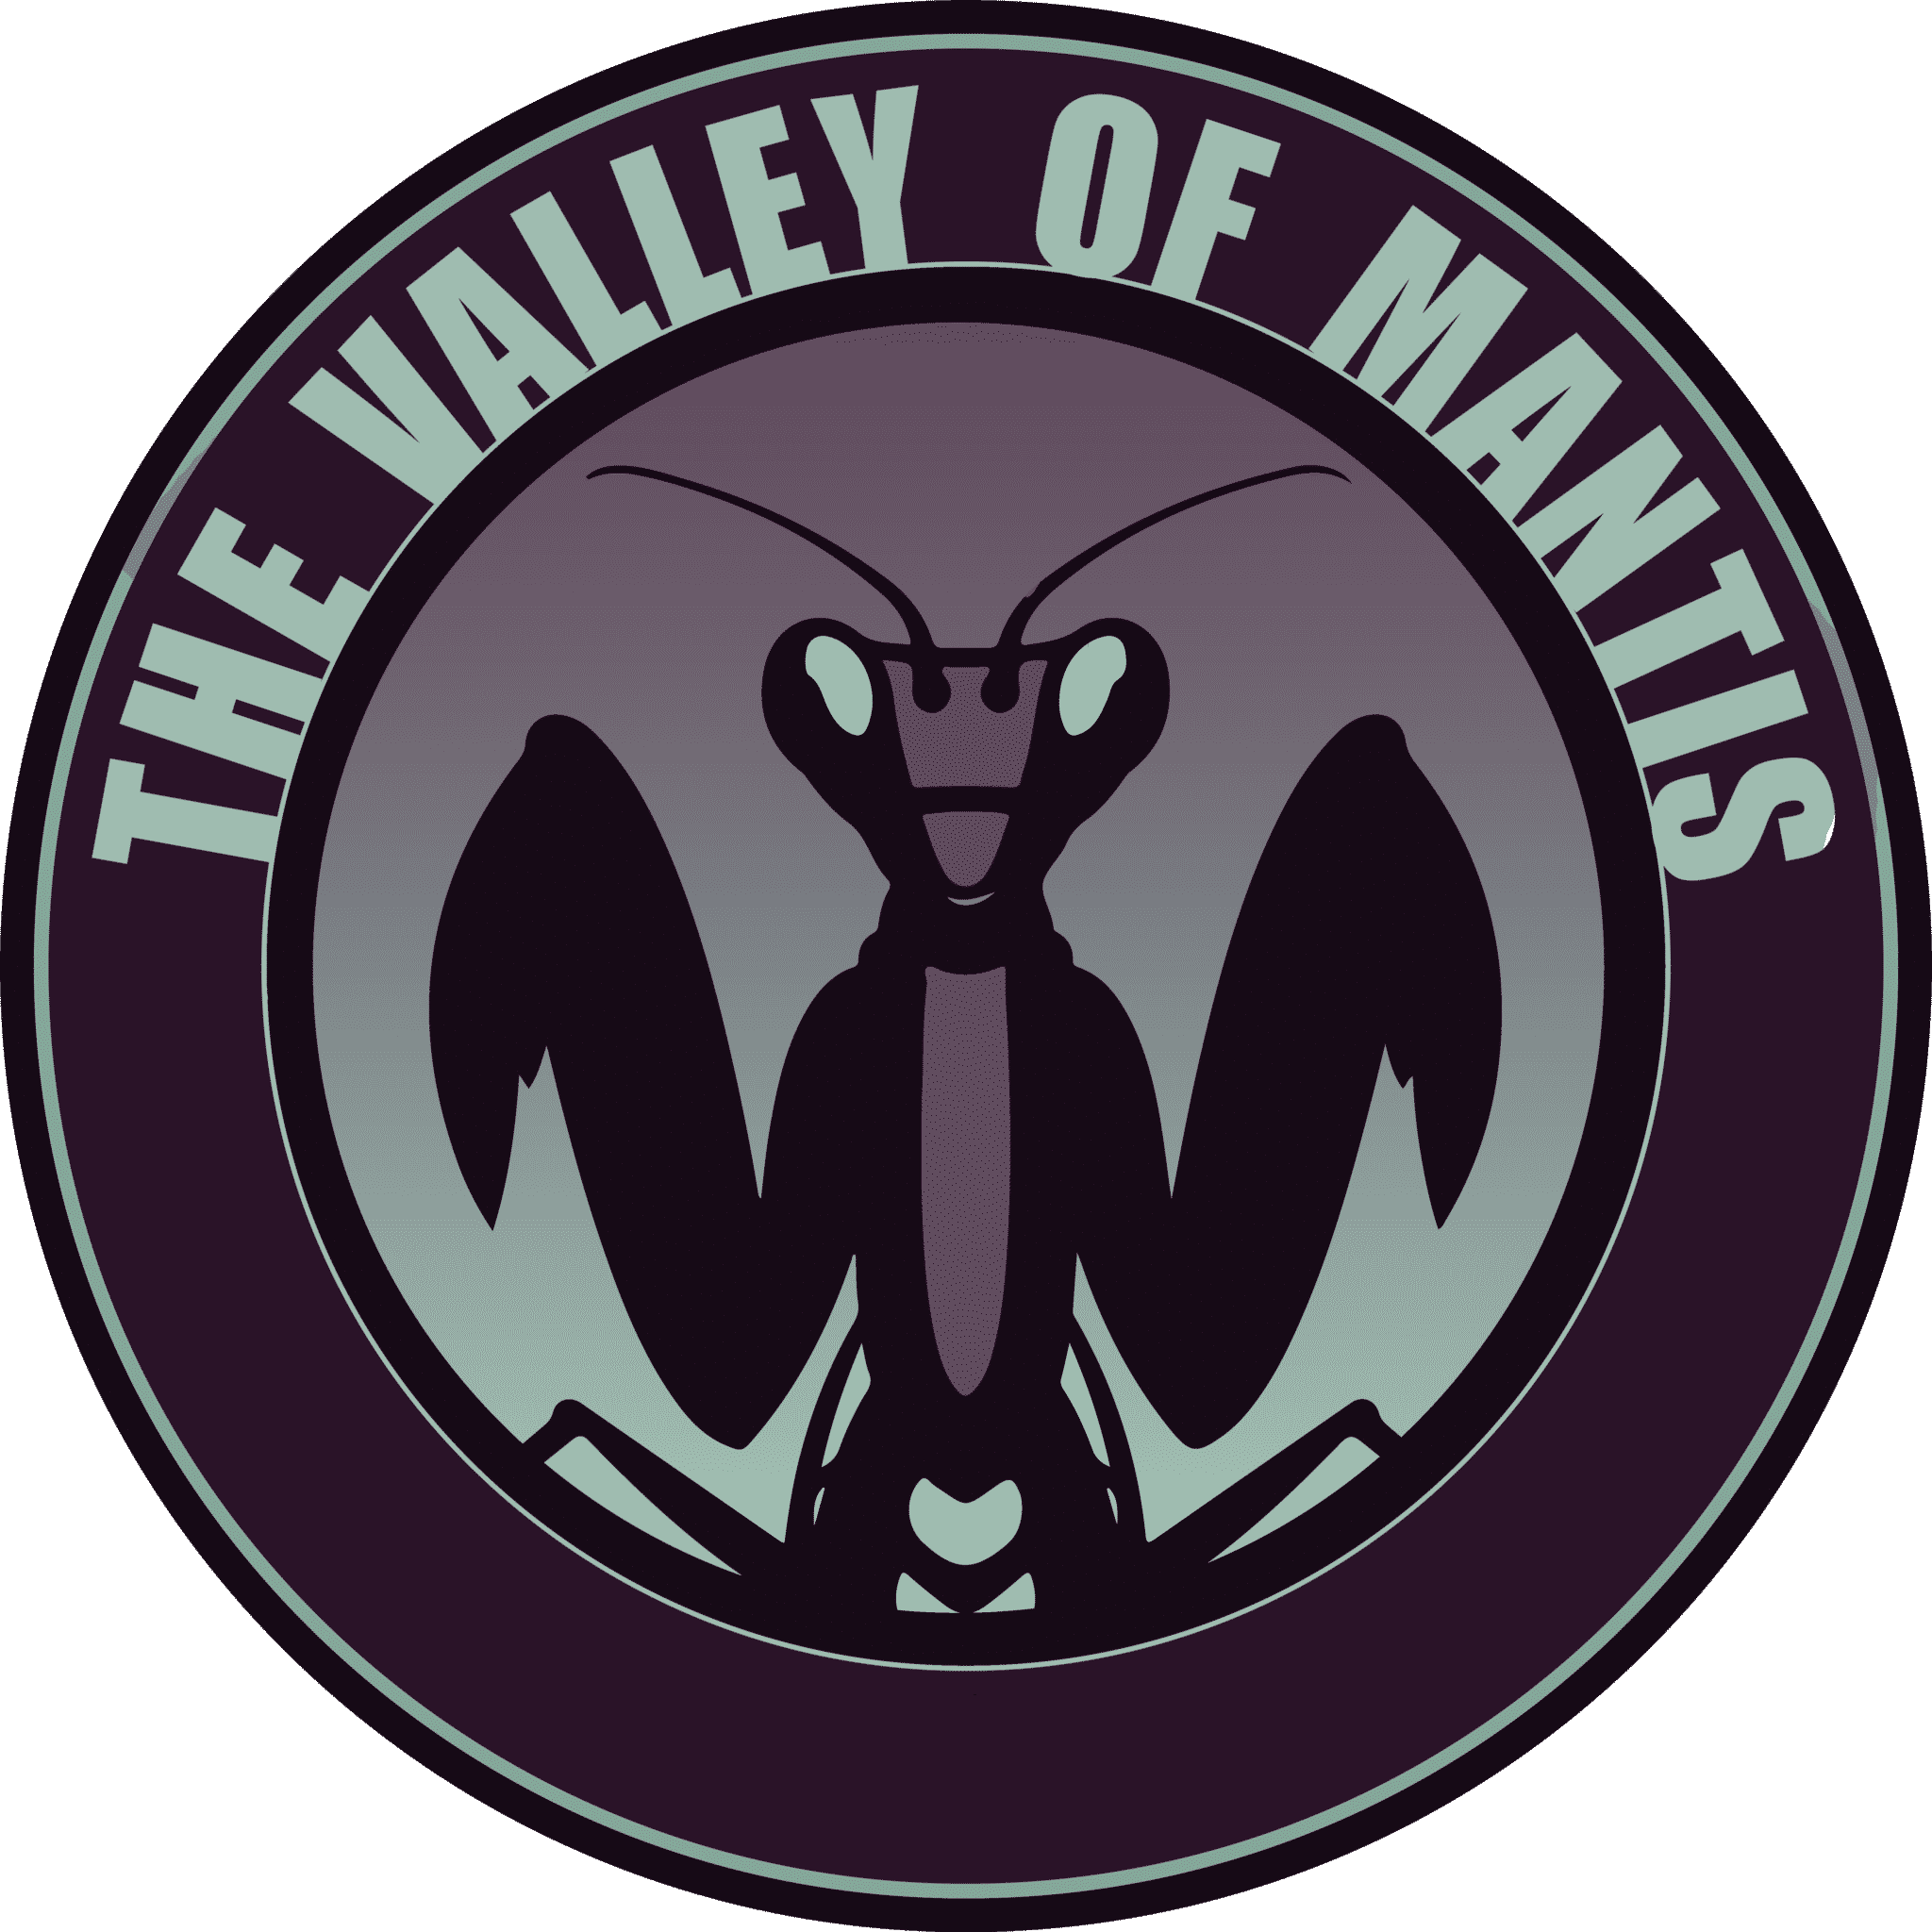 Profile picture The Valley of Mantis